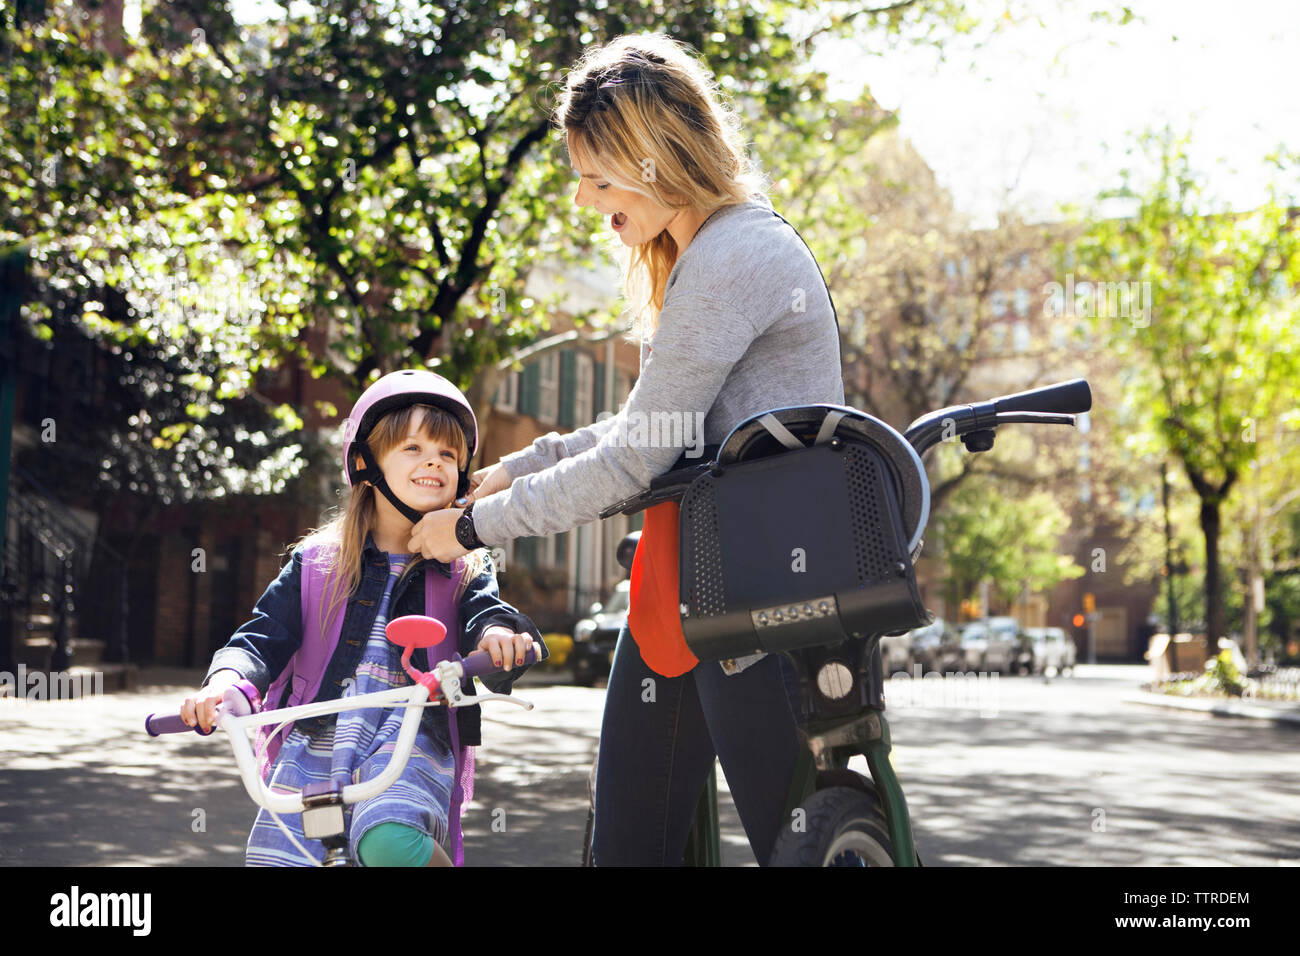 Woman assisting daughter in wearing cycling helmet on street Stock Photo